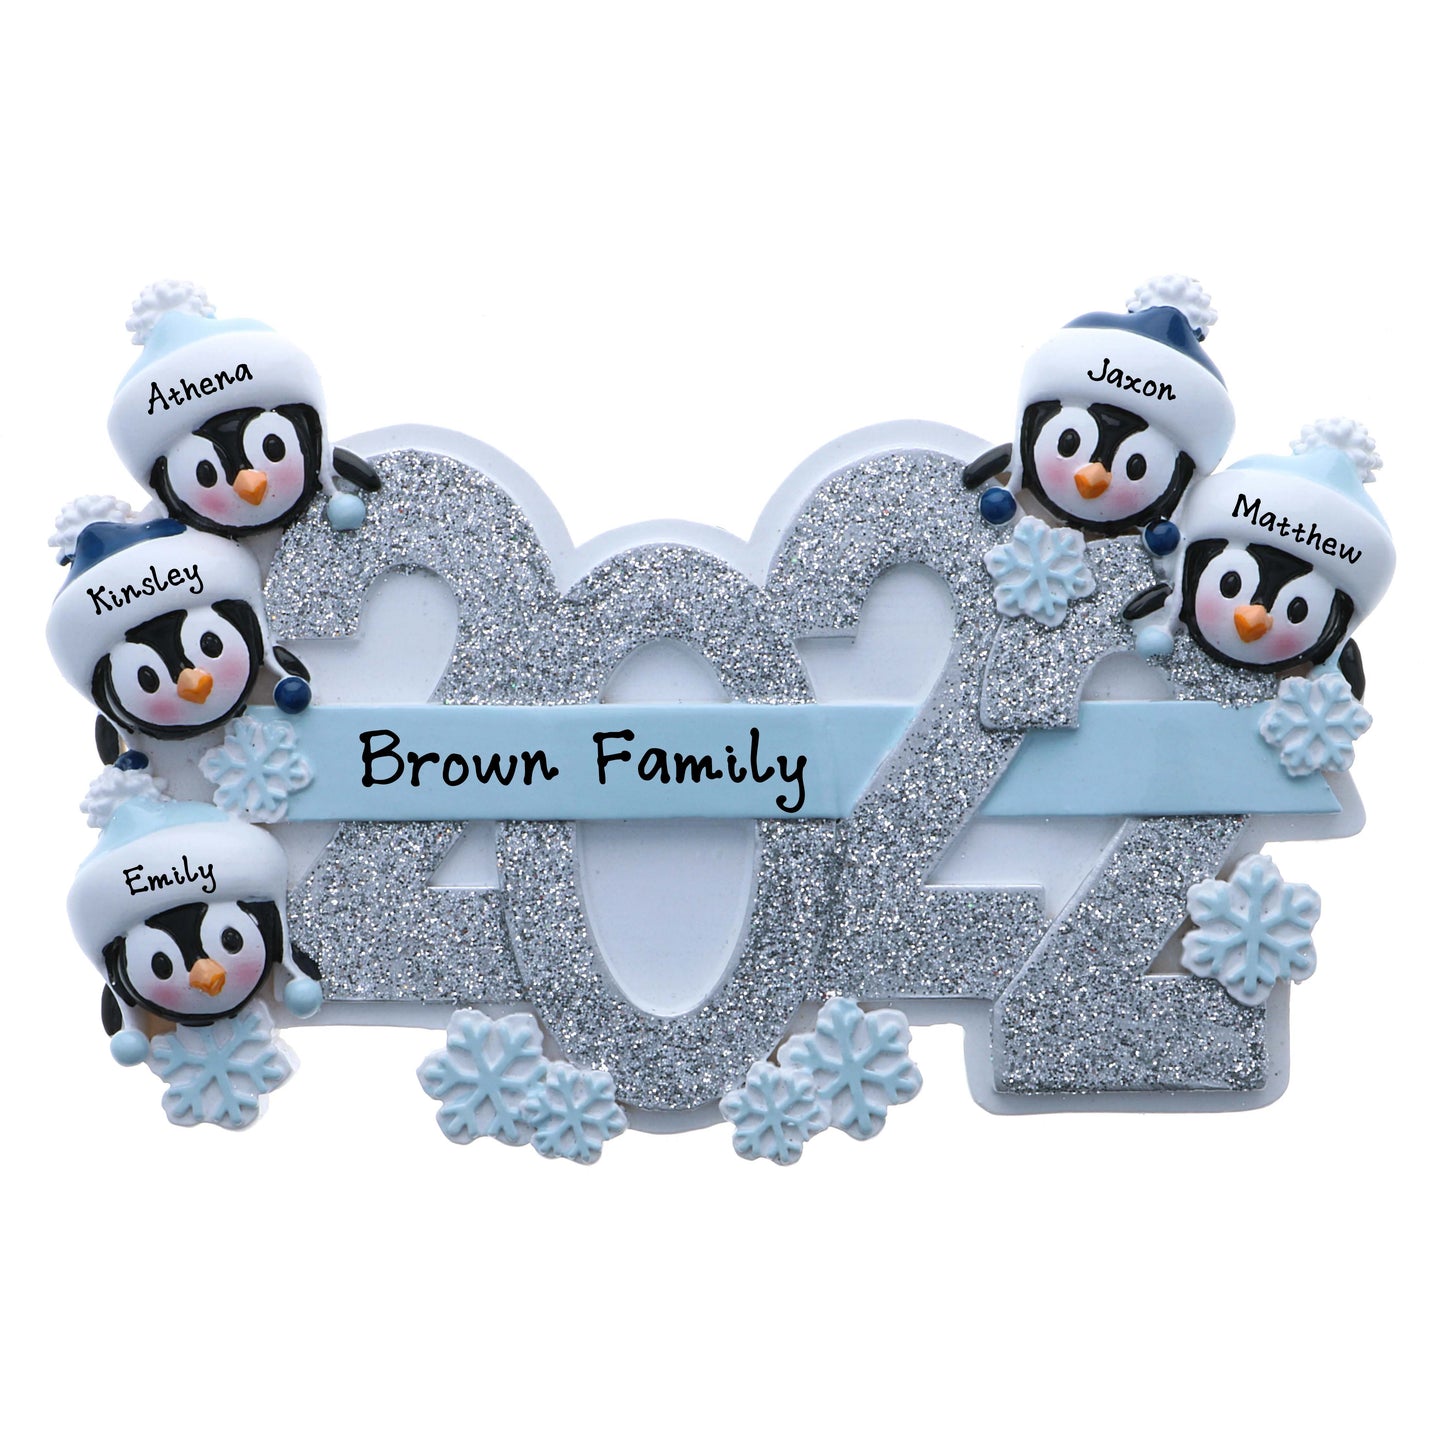 Personalized Family Christmas Ornament (Family of 5)